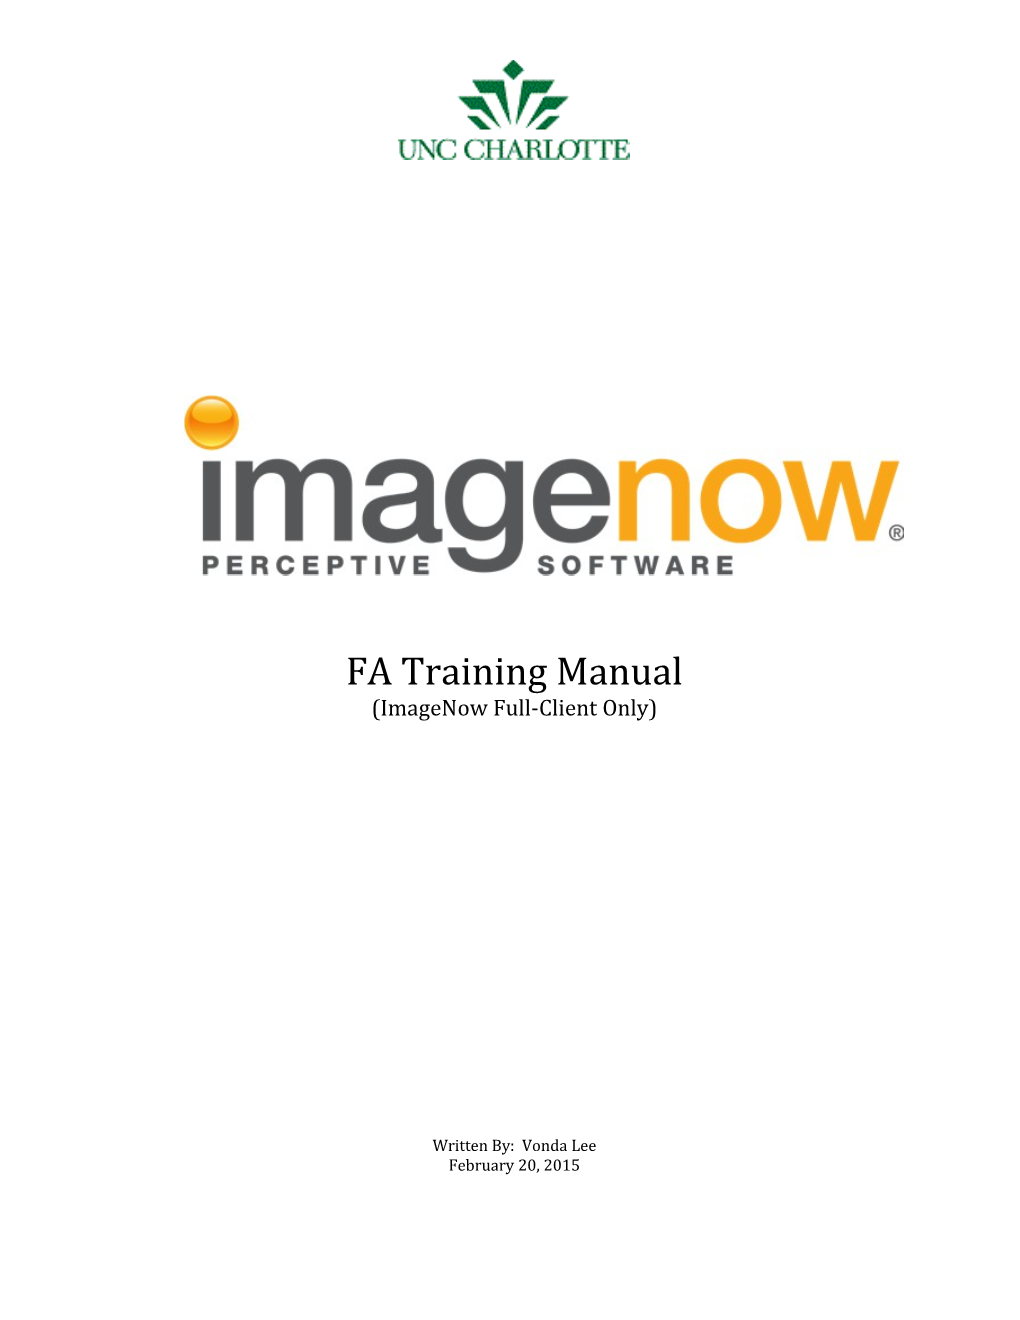 Imagenow Full-Client Only